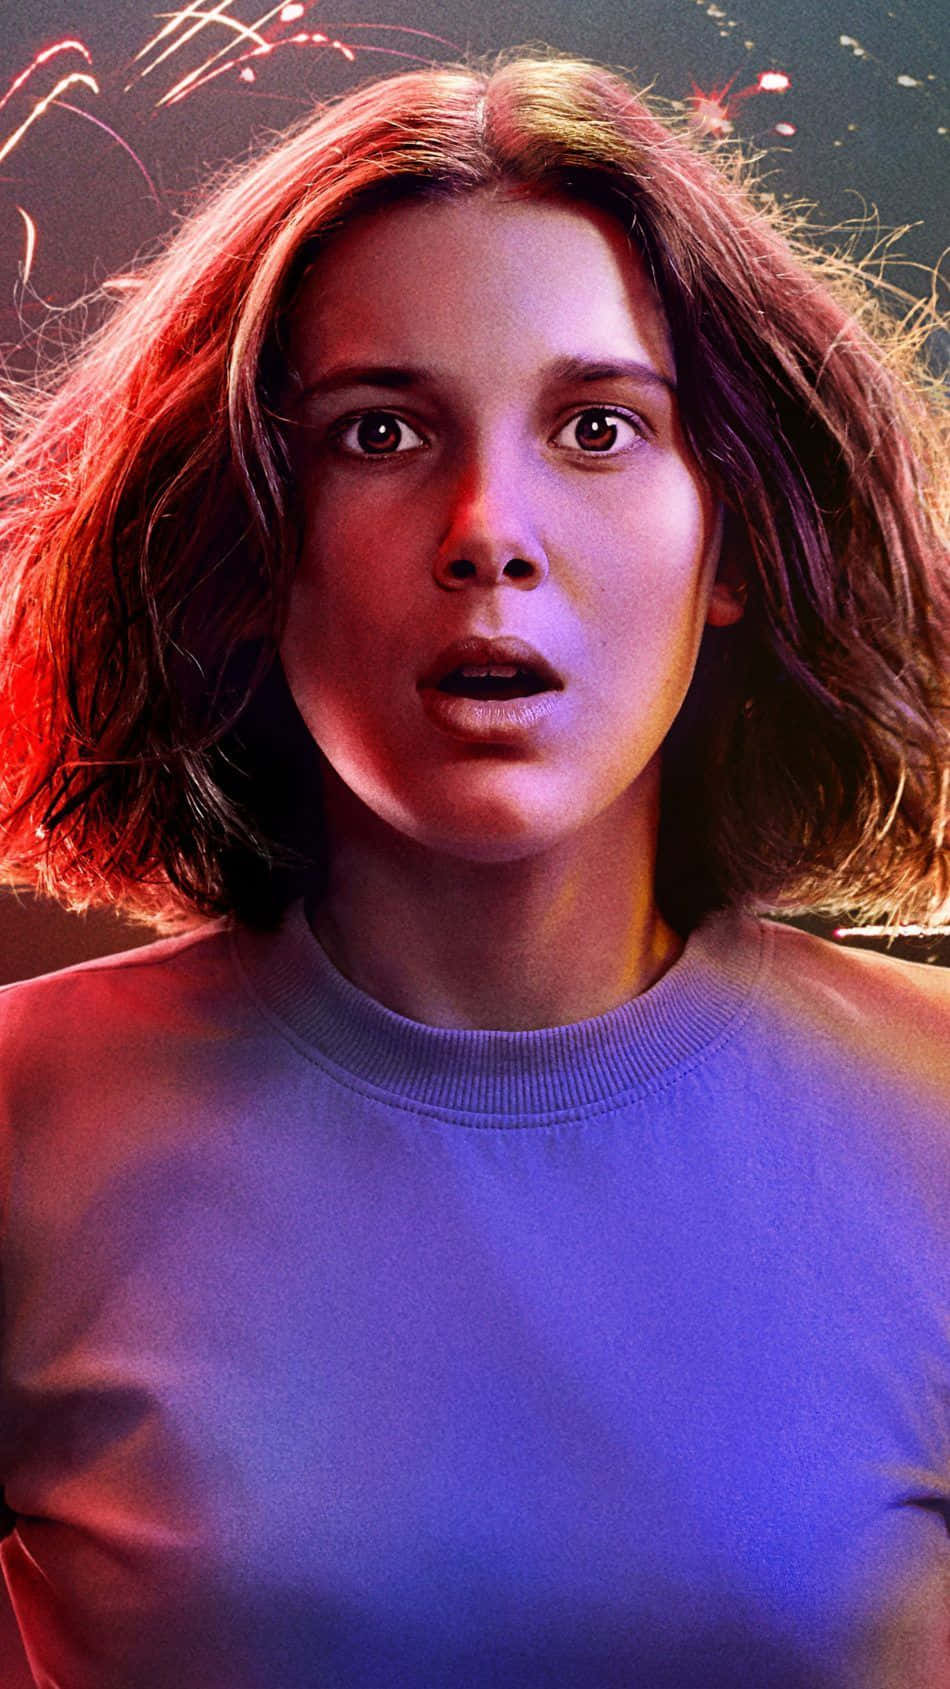 "My Mind, My Strength: Eleven’s Power Revealed" Wallpaper